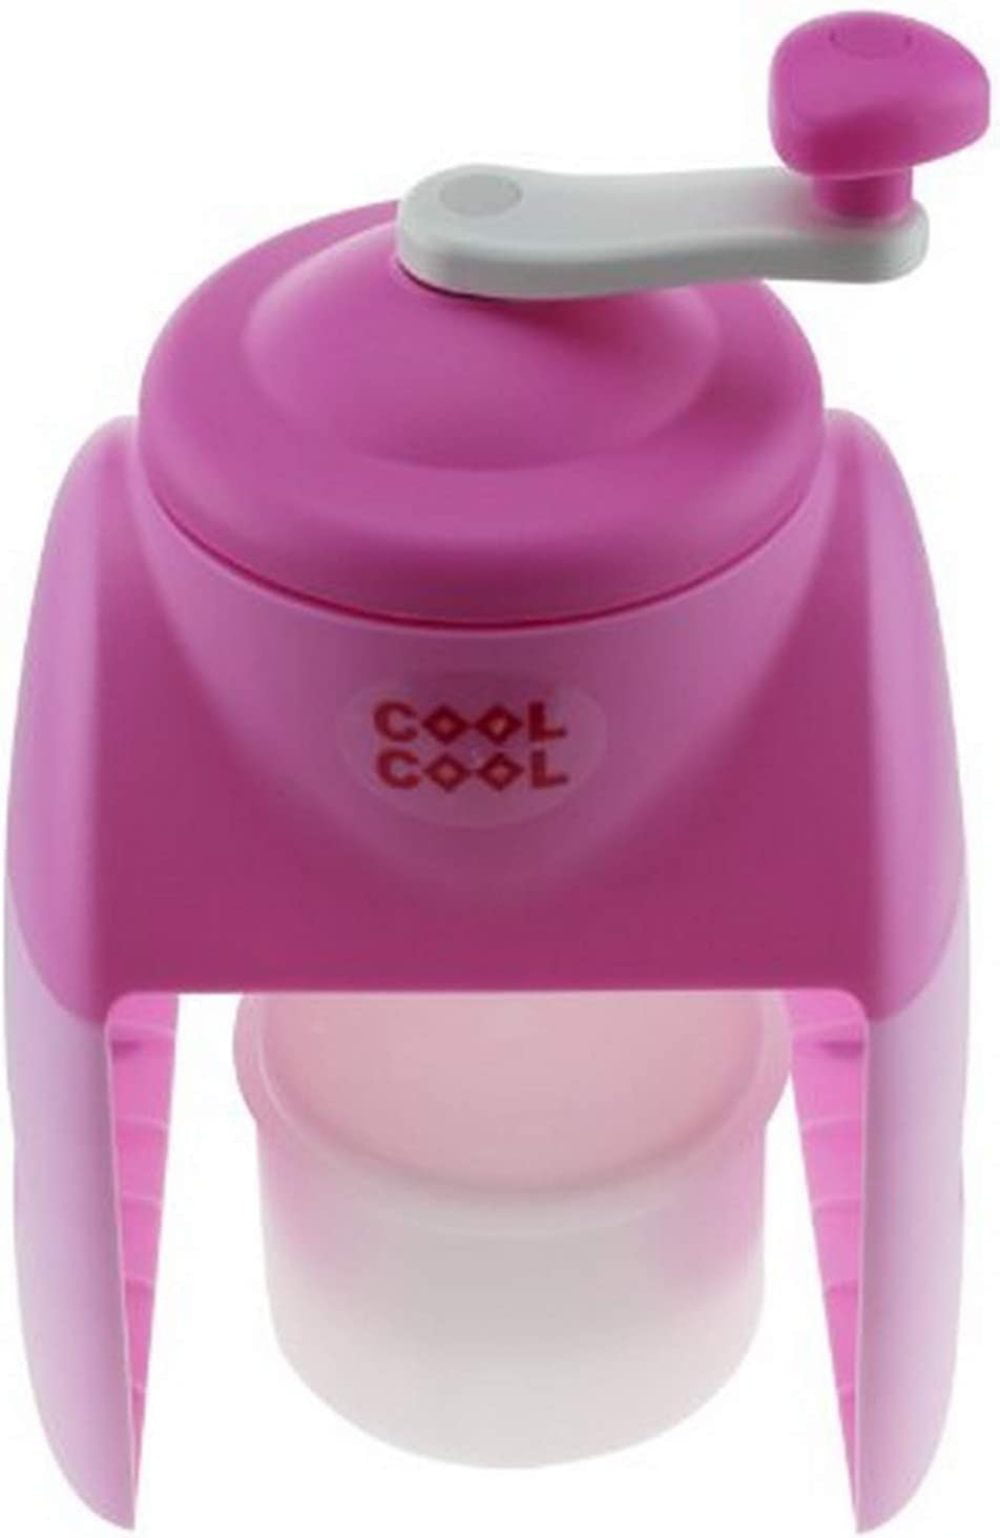 Pink Japanese Snow Cone Maker/ice Shaver 